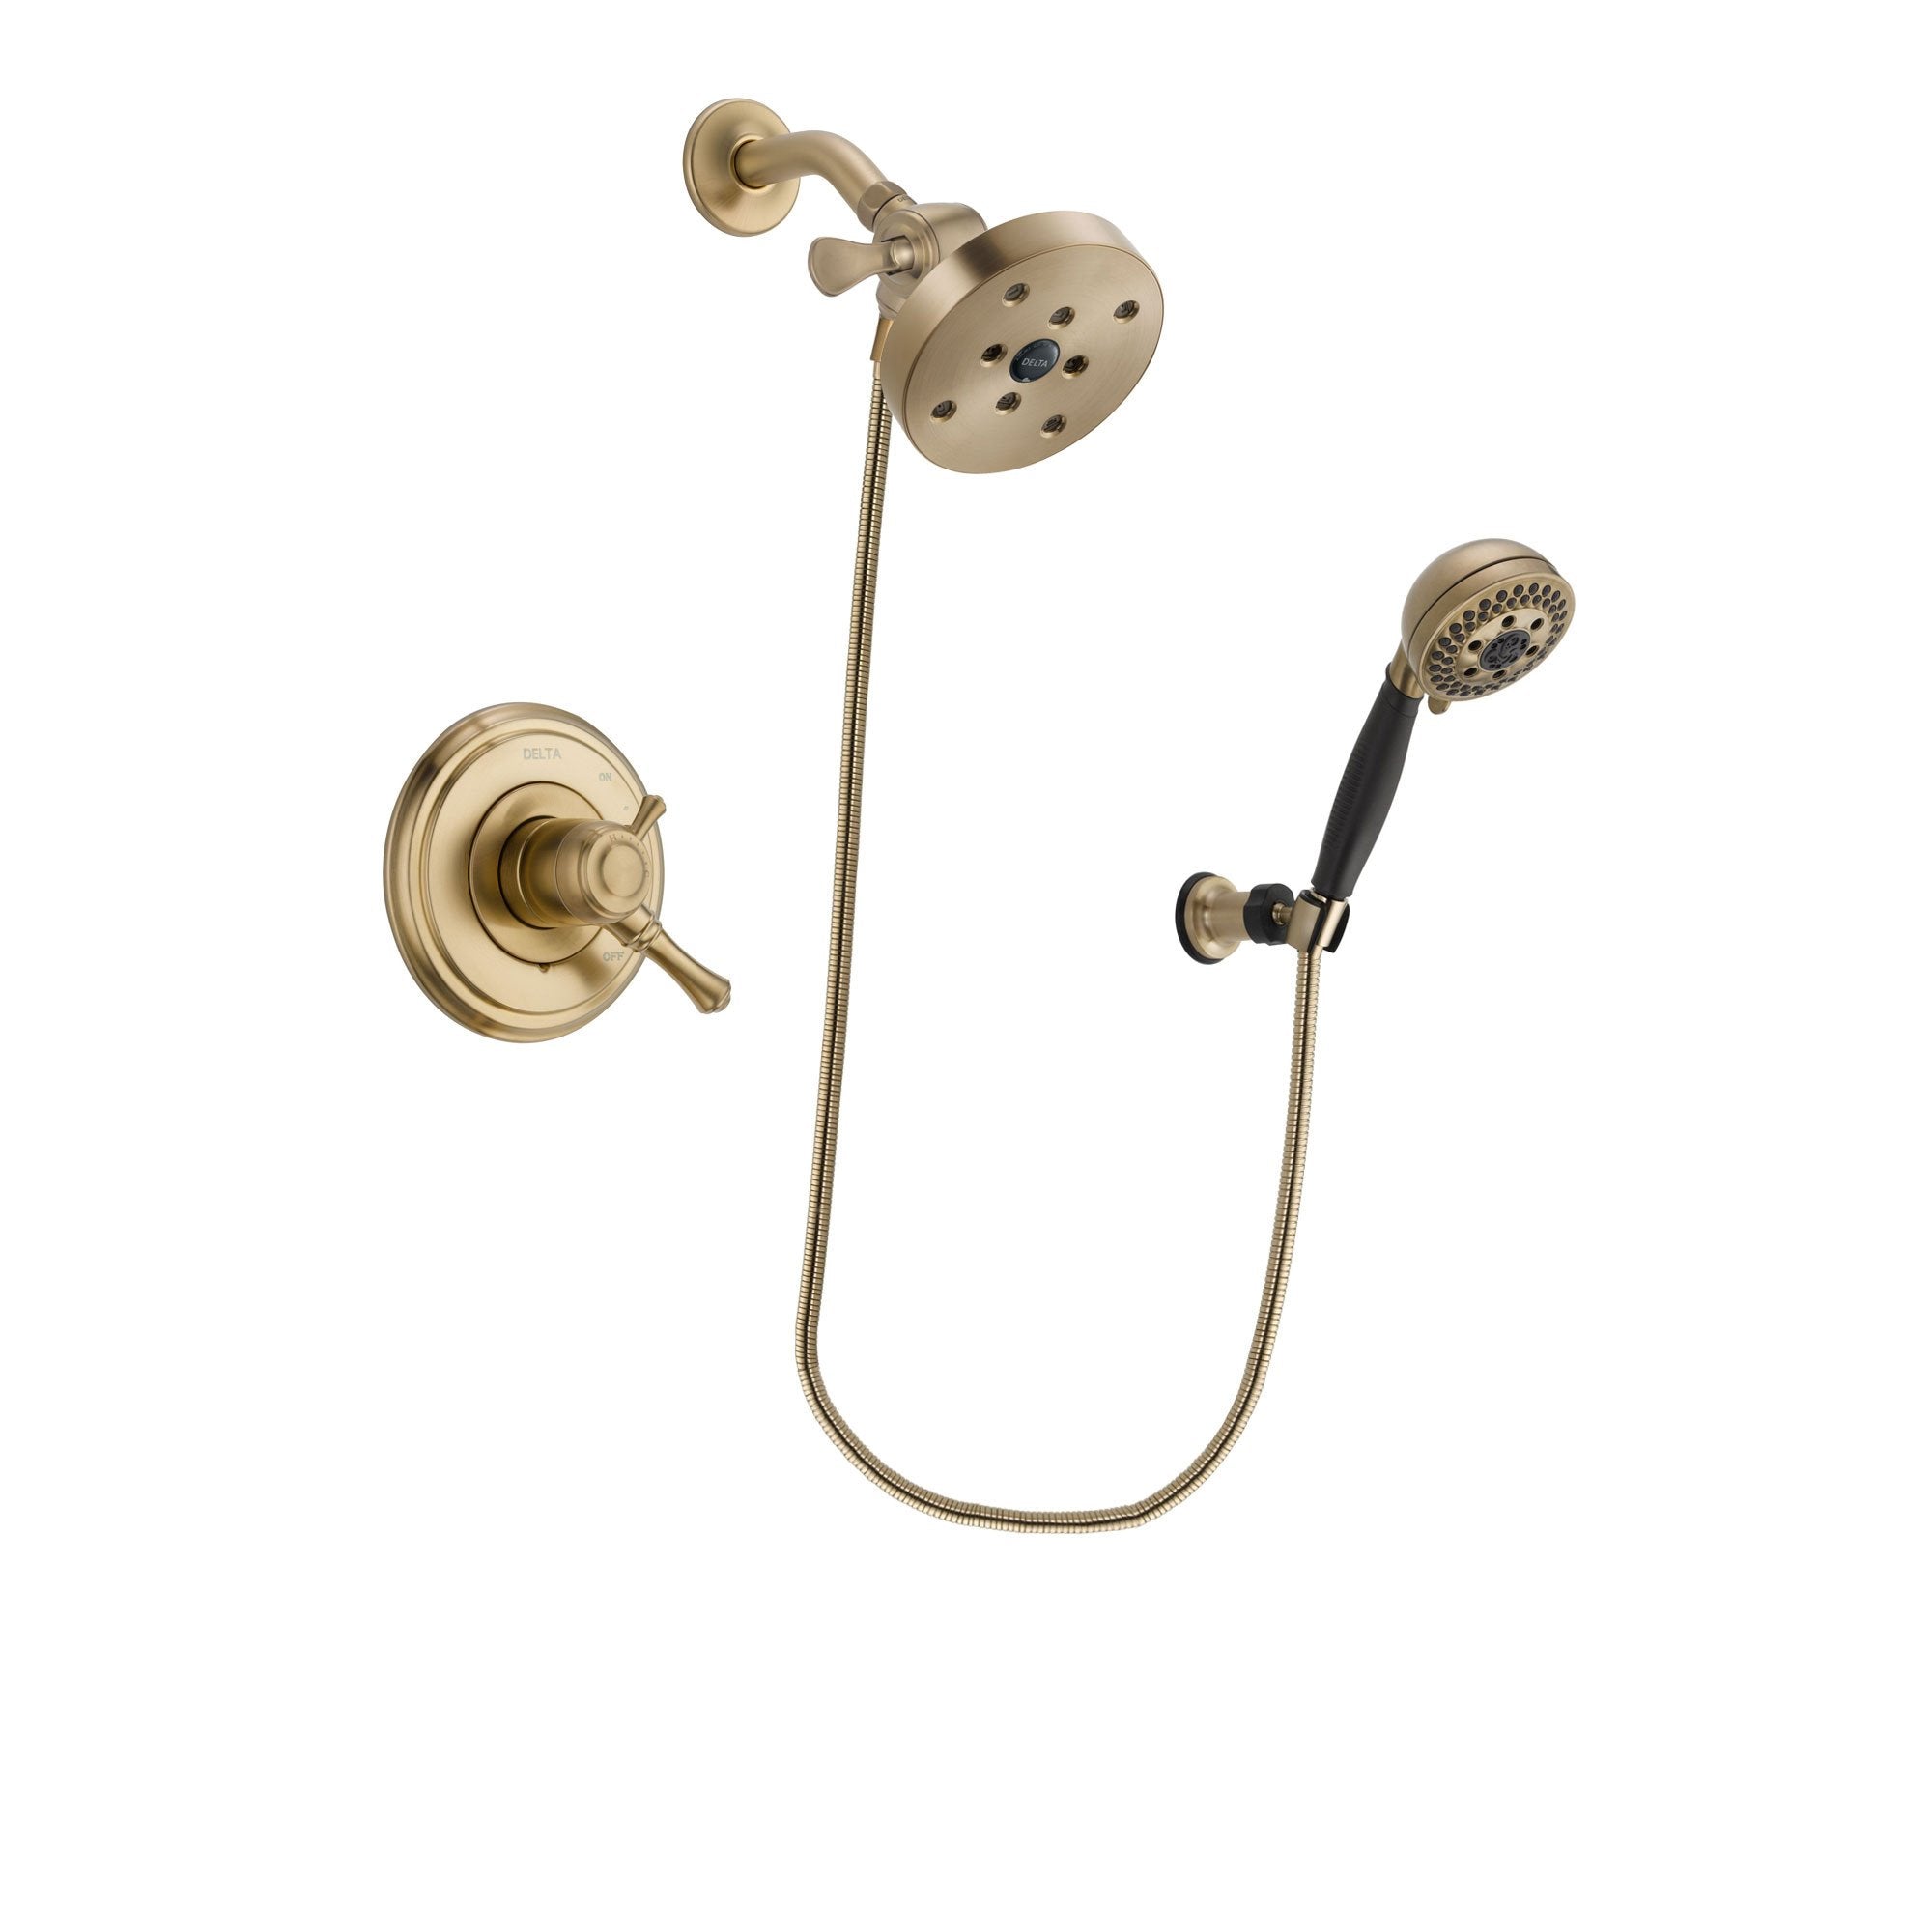 Delta Cassidy Champagne Bronze Finish Dual Control Shower Faucet System Package with 5-1/2 inch Showerhead and 5-Spray Wall Mount Hand Shower Includes Rough-in Valve DSP3836V